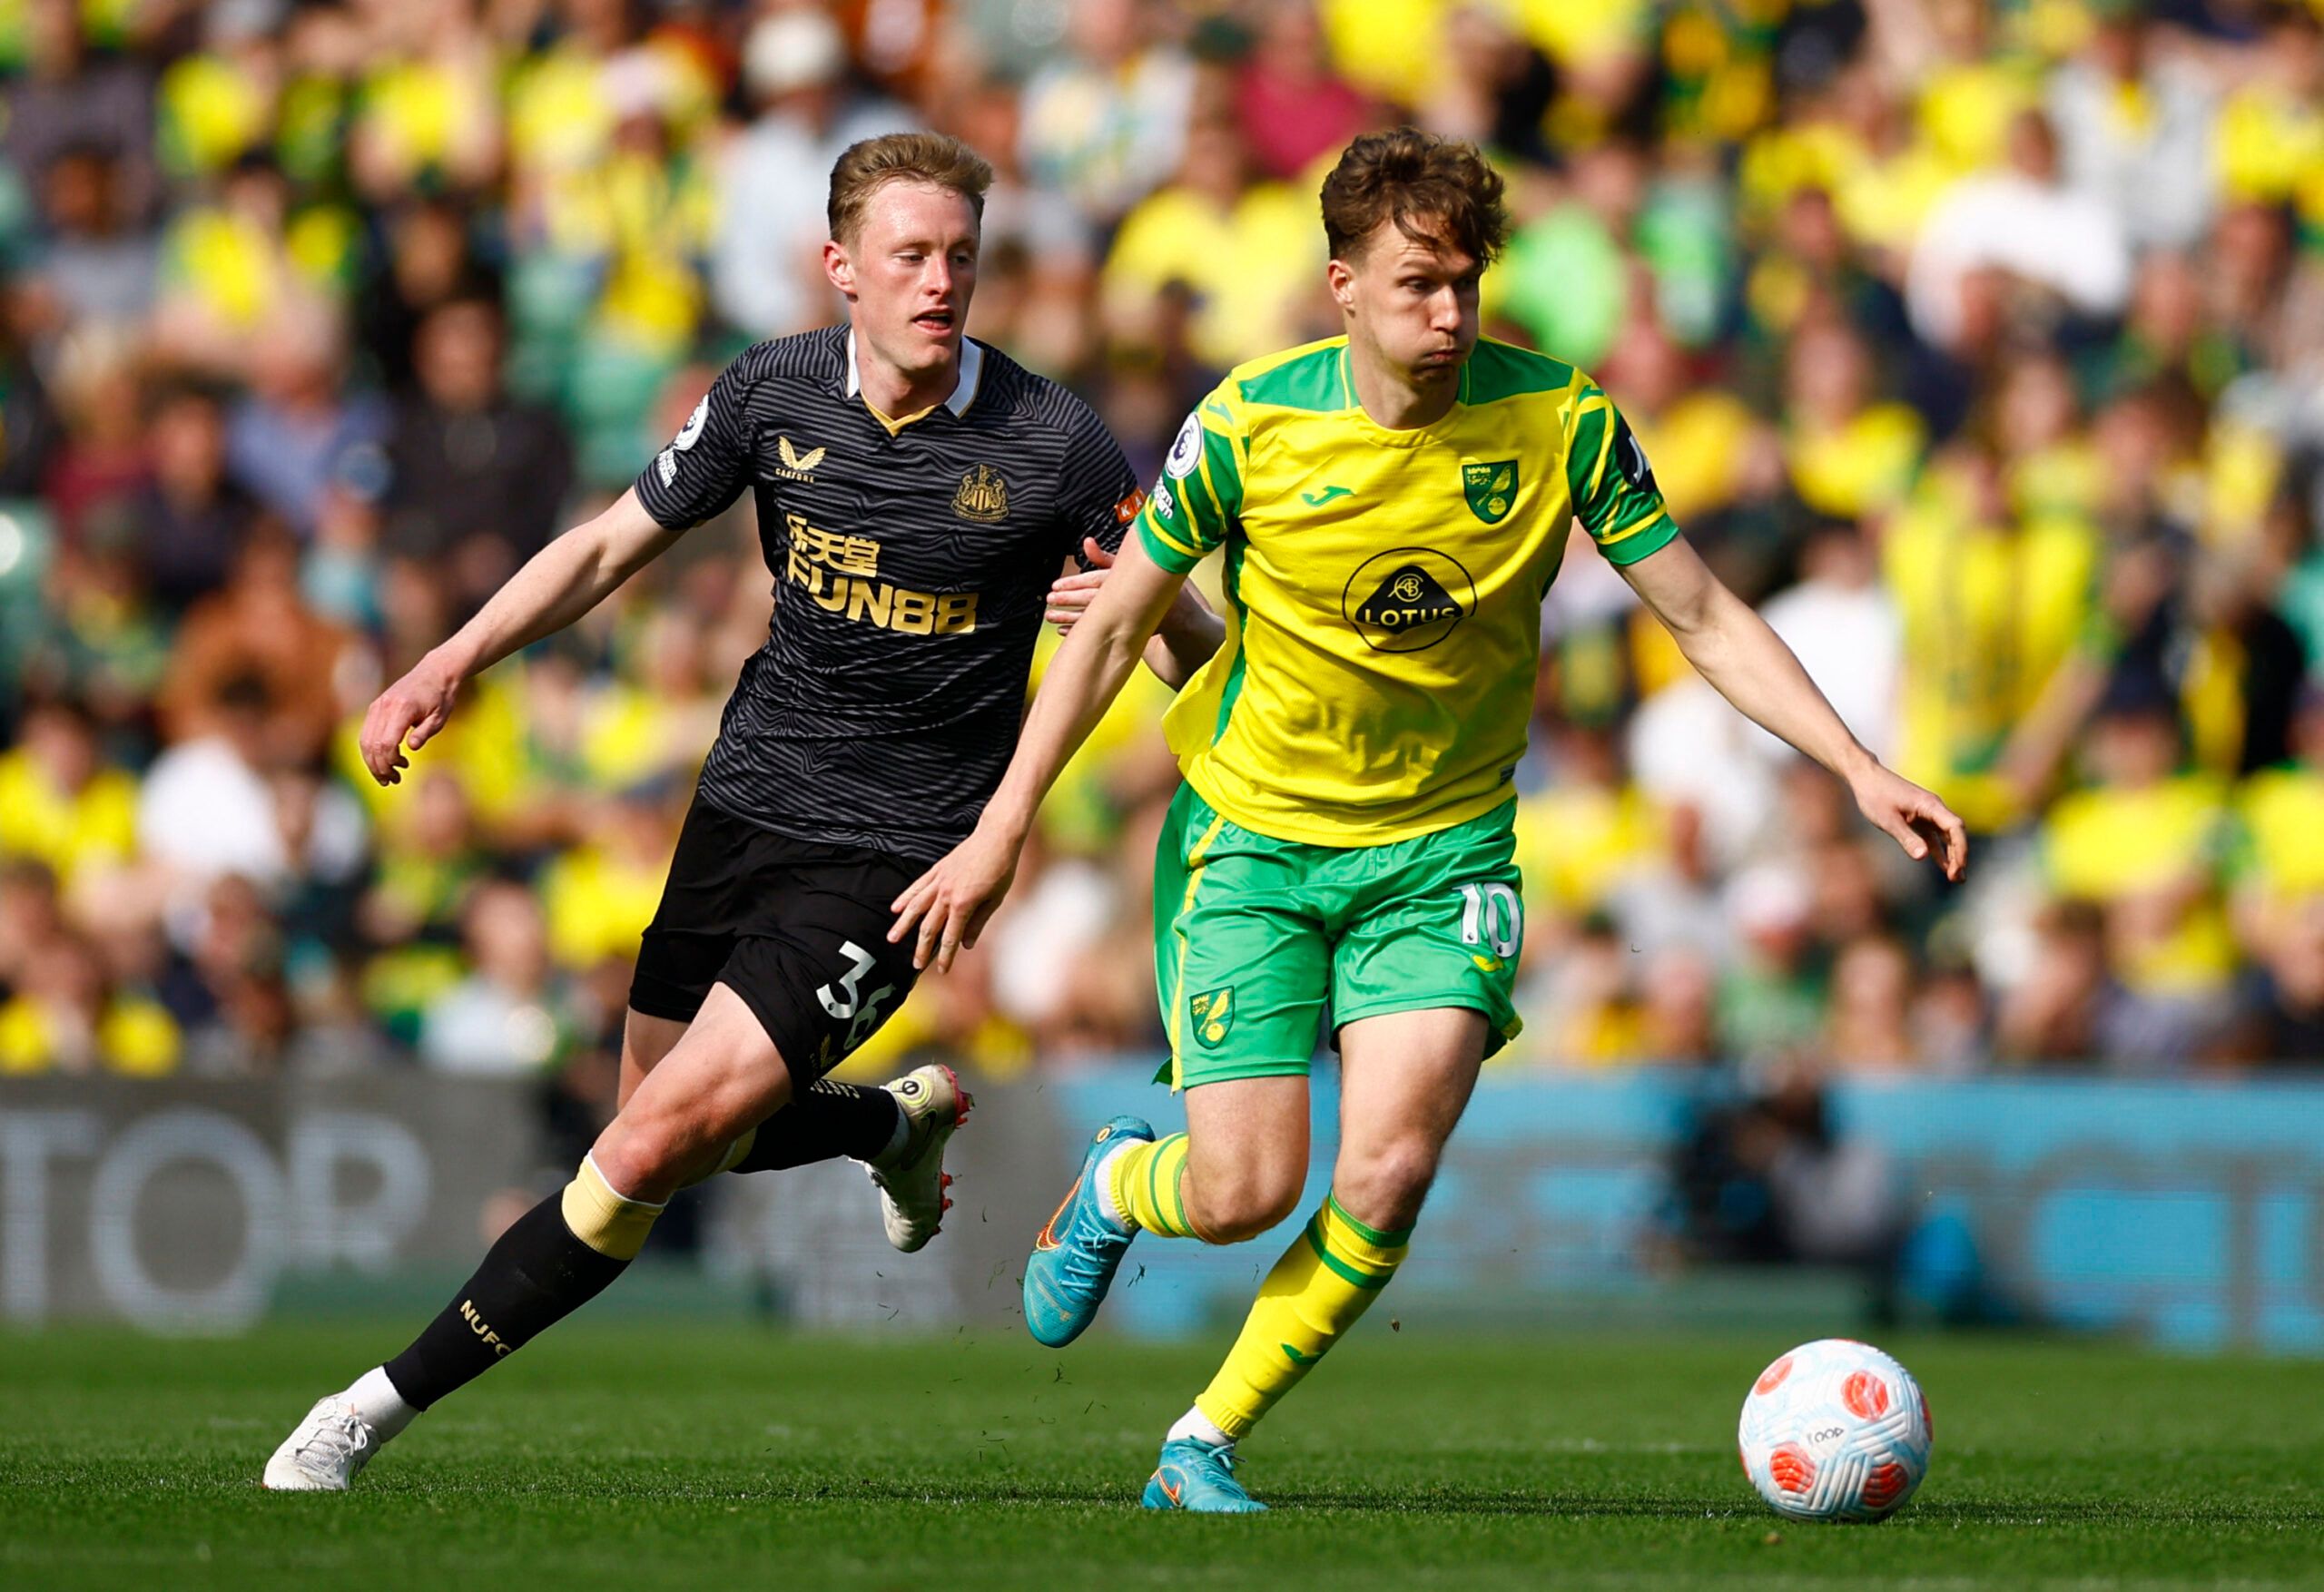 Soccer Football - Premier League - Norwich City v Newcastle United - Carrow Road, Norwich, Britain - April 23, 2022 Norwich City's Kieran Dowell in action with Newcastle United's Sean Longstaff Action Images via Reuters/Andrew Boyers EDITORIAL USE ONLY. No use with unauthorized audio, video, data, fixture lists, club/league logos or 'live' services. Online in-match use limited to 75 images, no video emulation. No use in betting, games or single club /league/player publications.  Please contact y